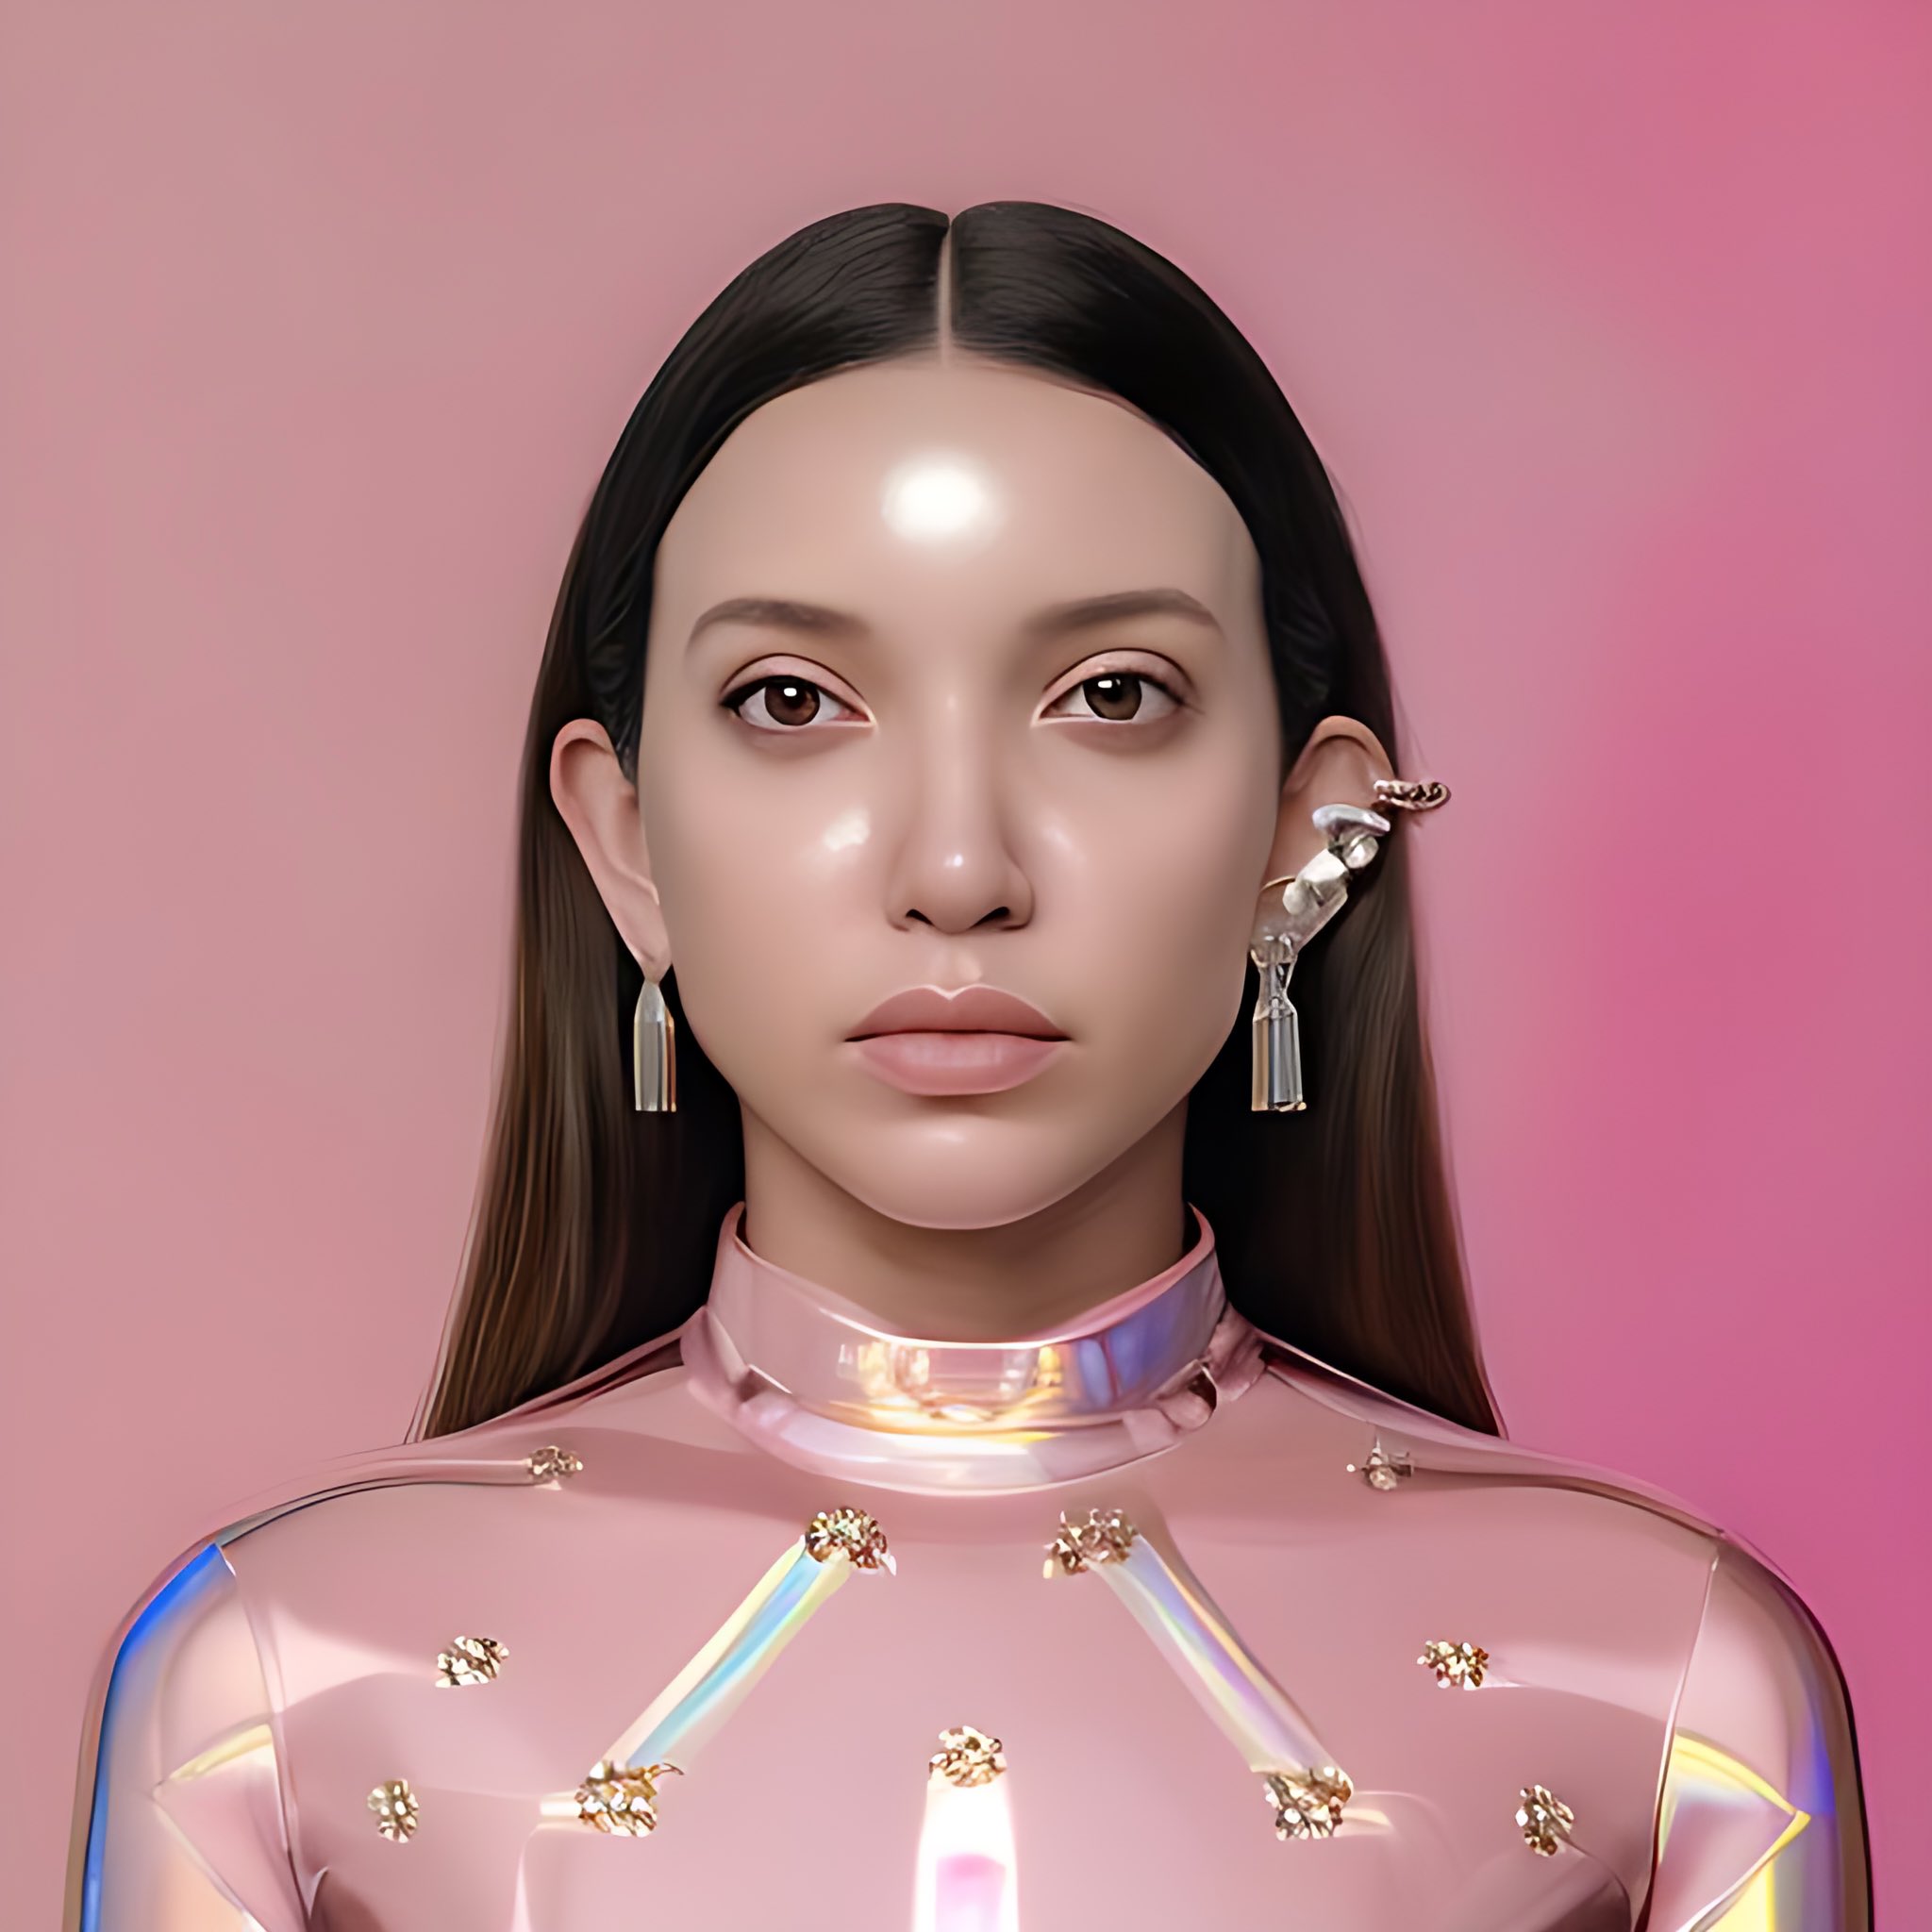 My Digital Twin Dressed in AI Generated Fashion (created with Lensa.AI)